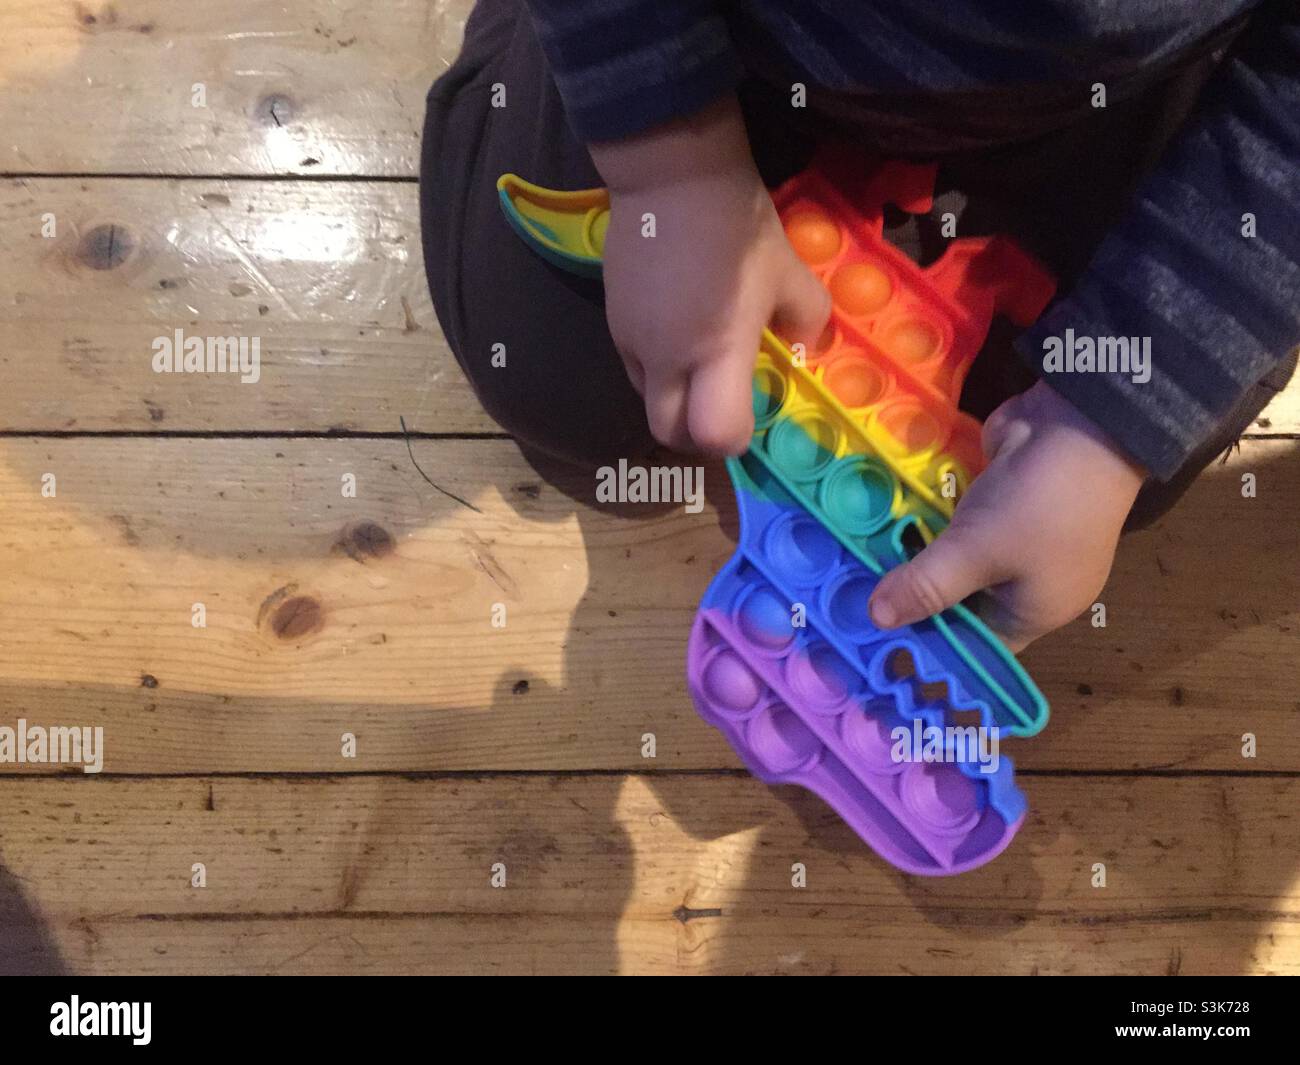 Toddler popping the blisters on a squeezable dragon. Anti-stress, pop it toy. Sensory fidget prop in a rainbow of colours. Squeezed on both sides. Quick pop-pop sounds. Stock Photo